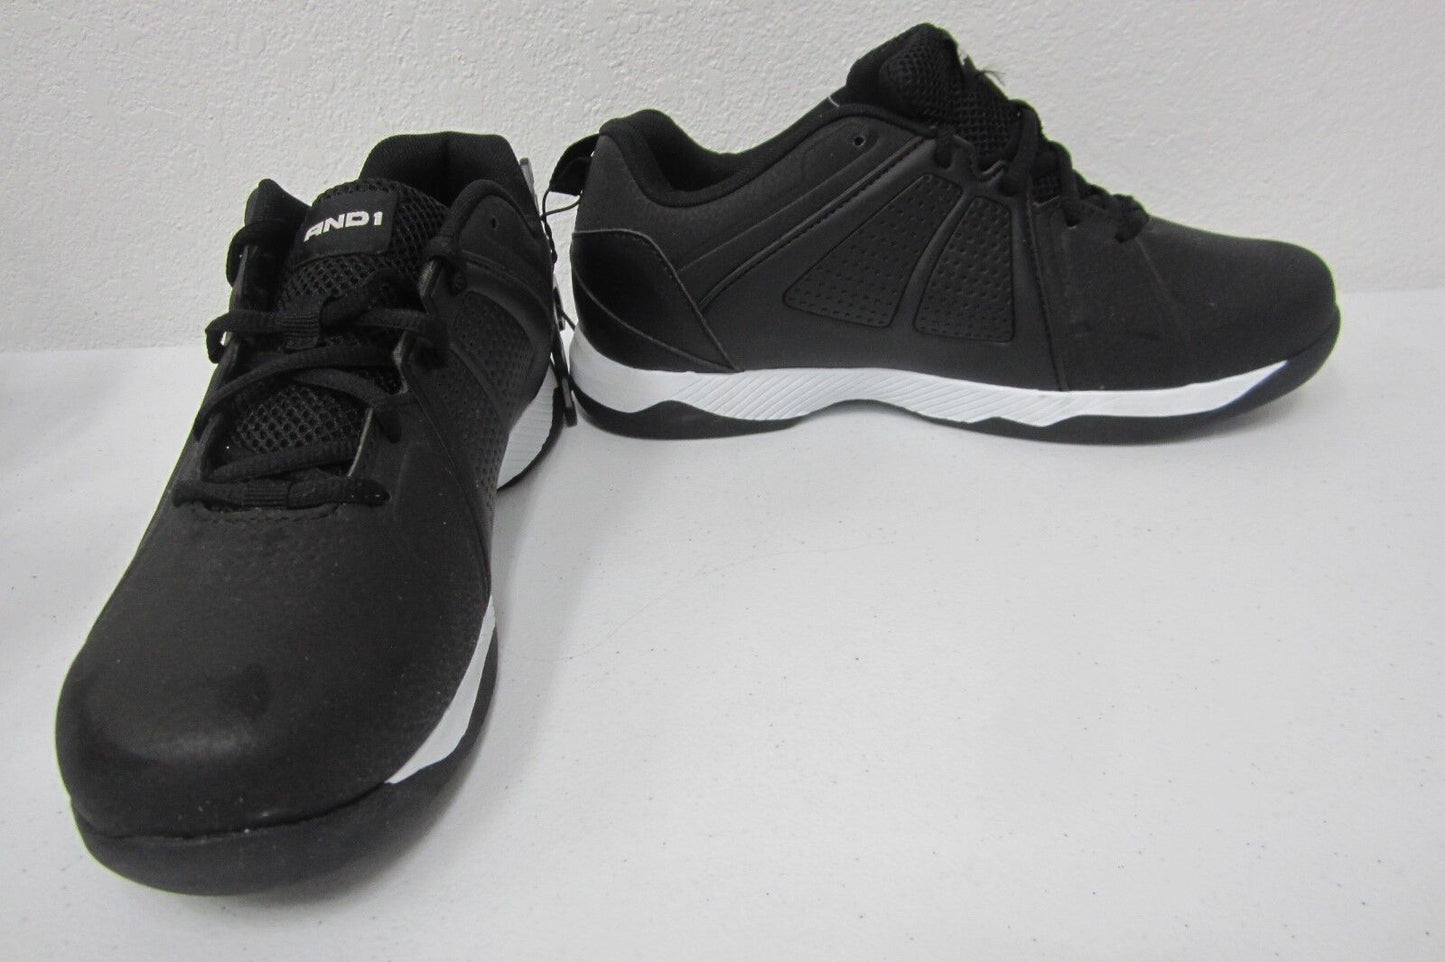 *NEW*  And1 Mens Draft 2 Shoes Outwear Athletic Sports Running Sneakers Size 8.5